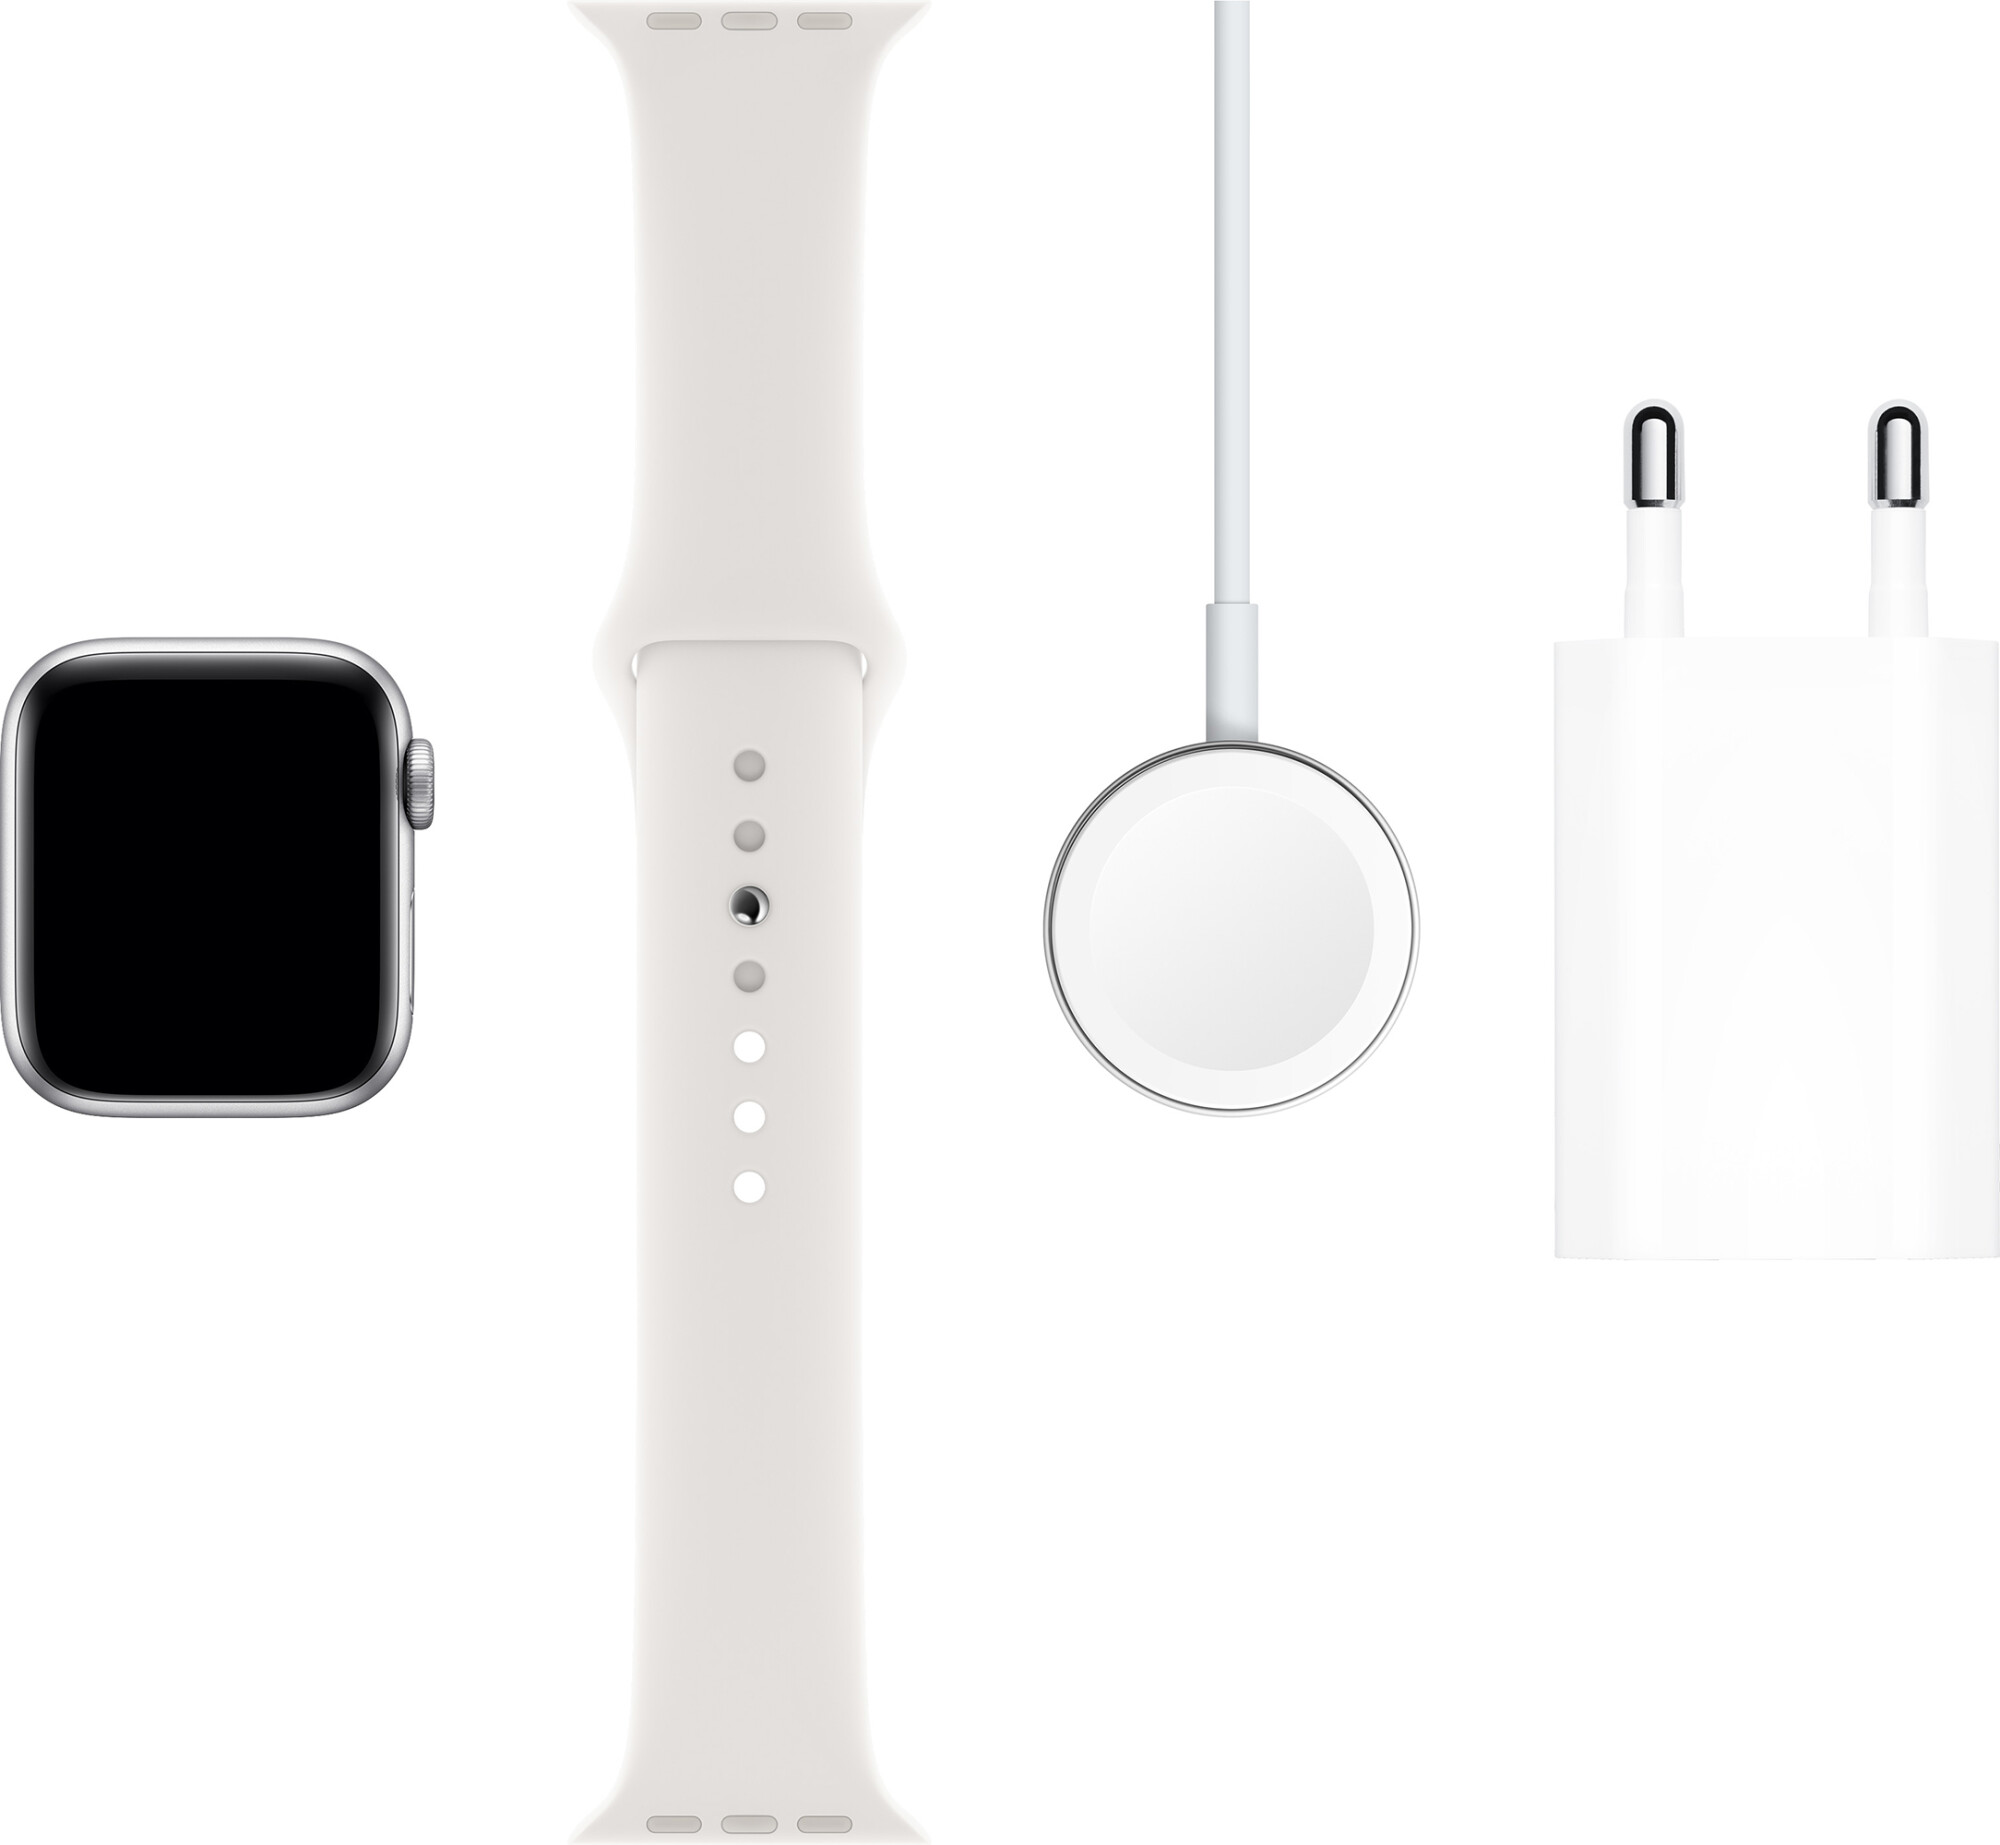 Apple Watch Series 5 (GPS + Cellular) 44mm Silver Aluminum Case with White Sport Band (MWVY2, MWWC2)